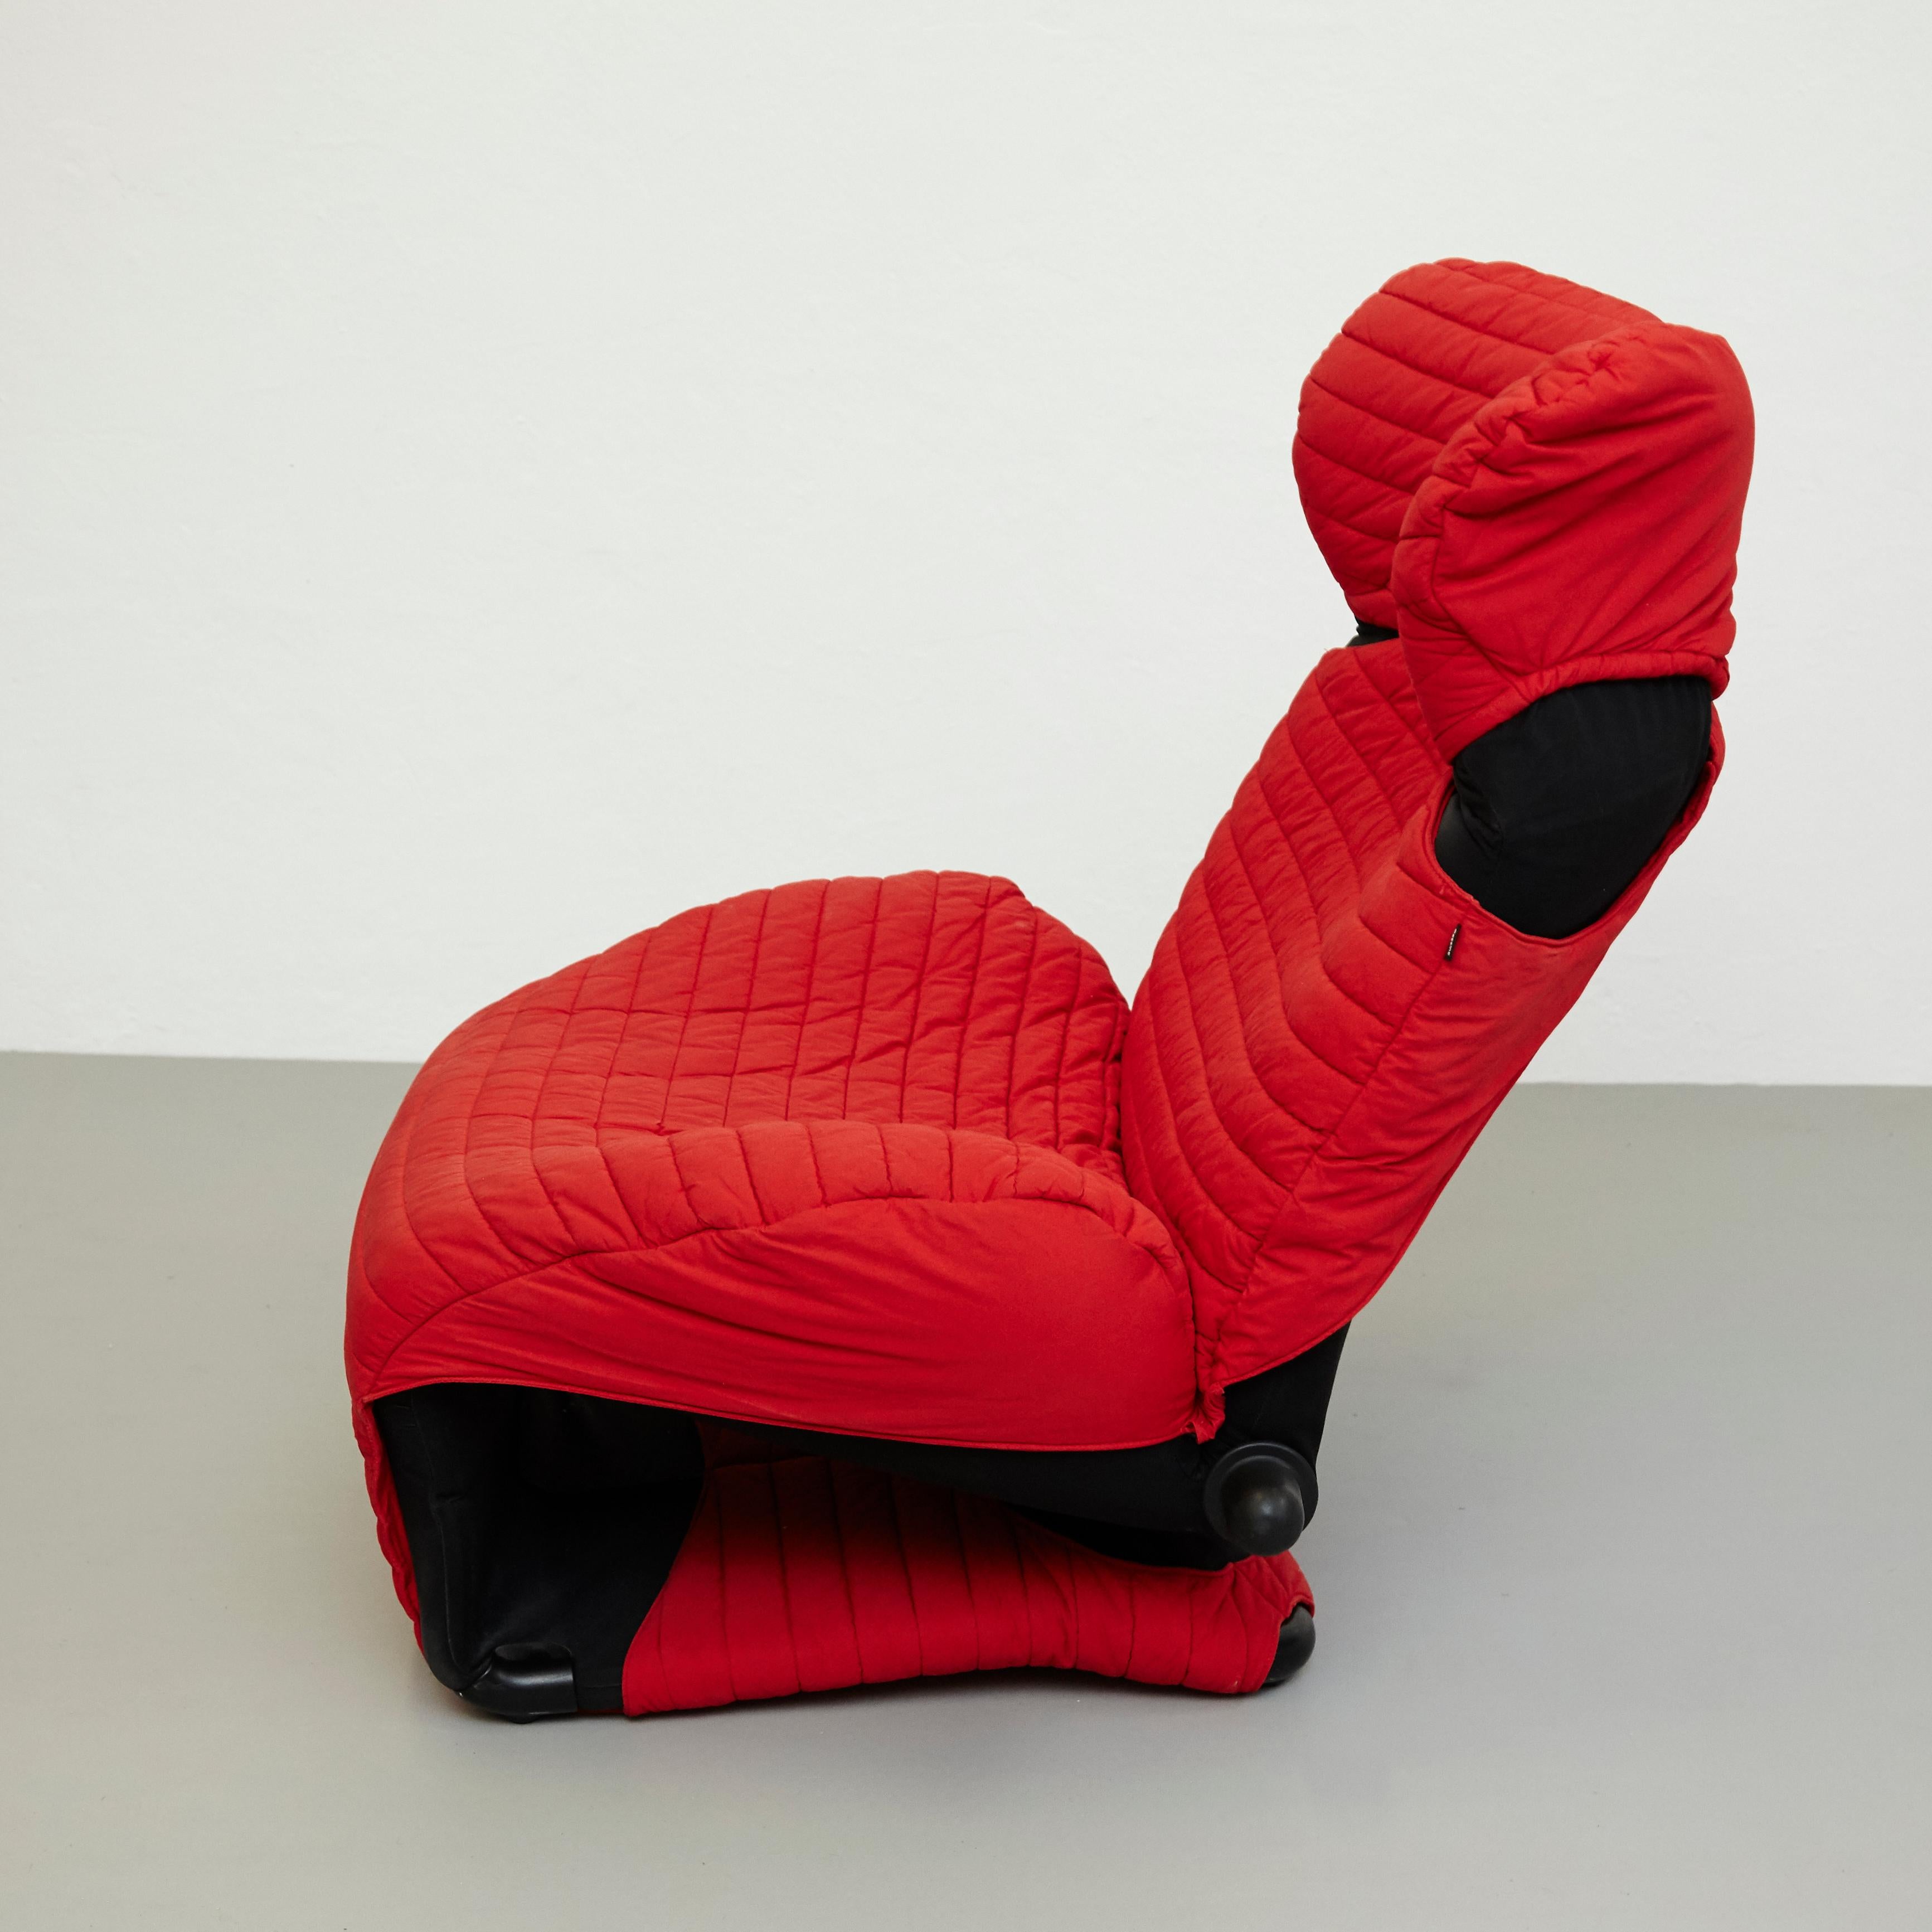 Steel Toshiyuki Kita Wink 111 Armchair in Black and Red by Cassina, circa 1980